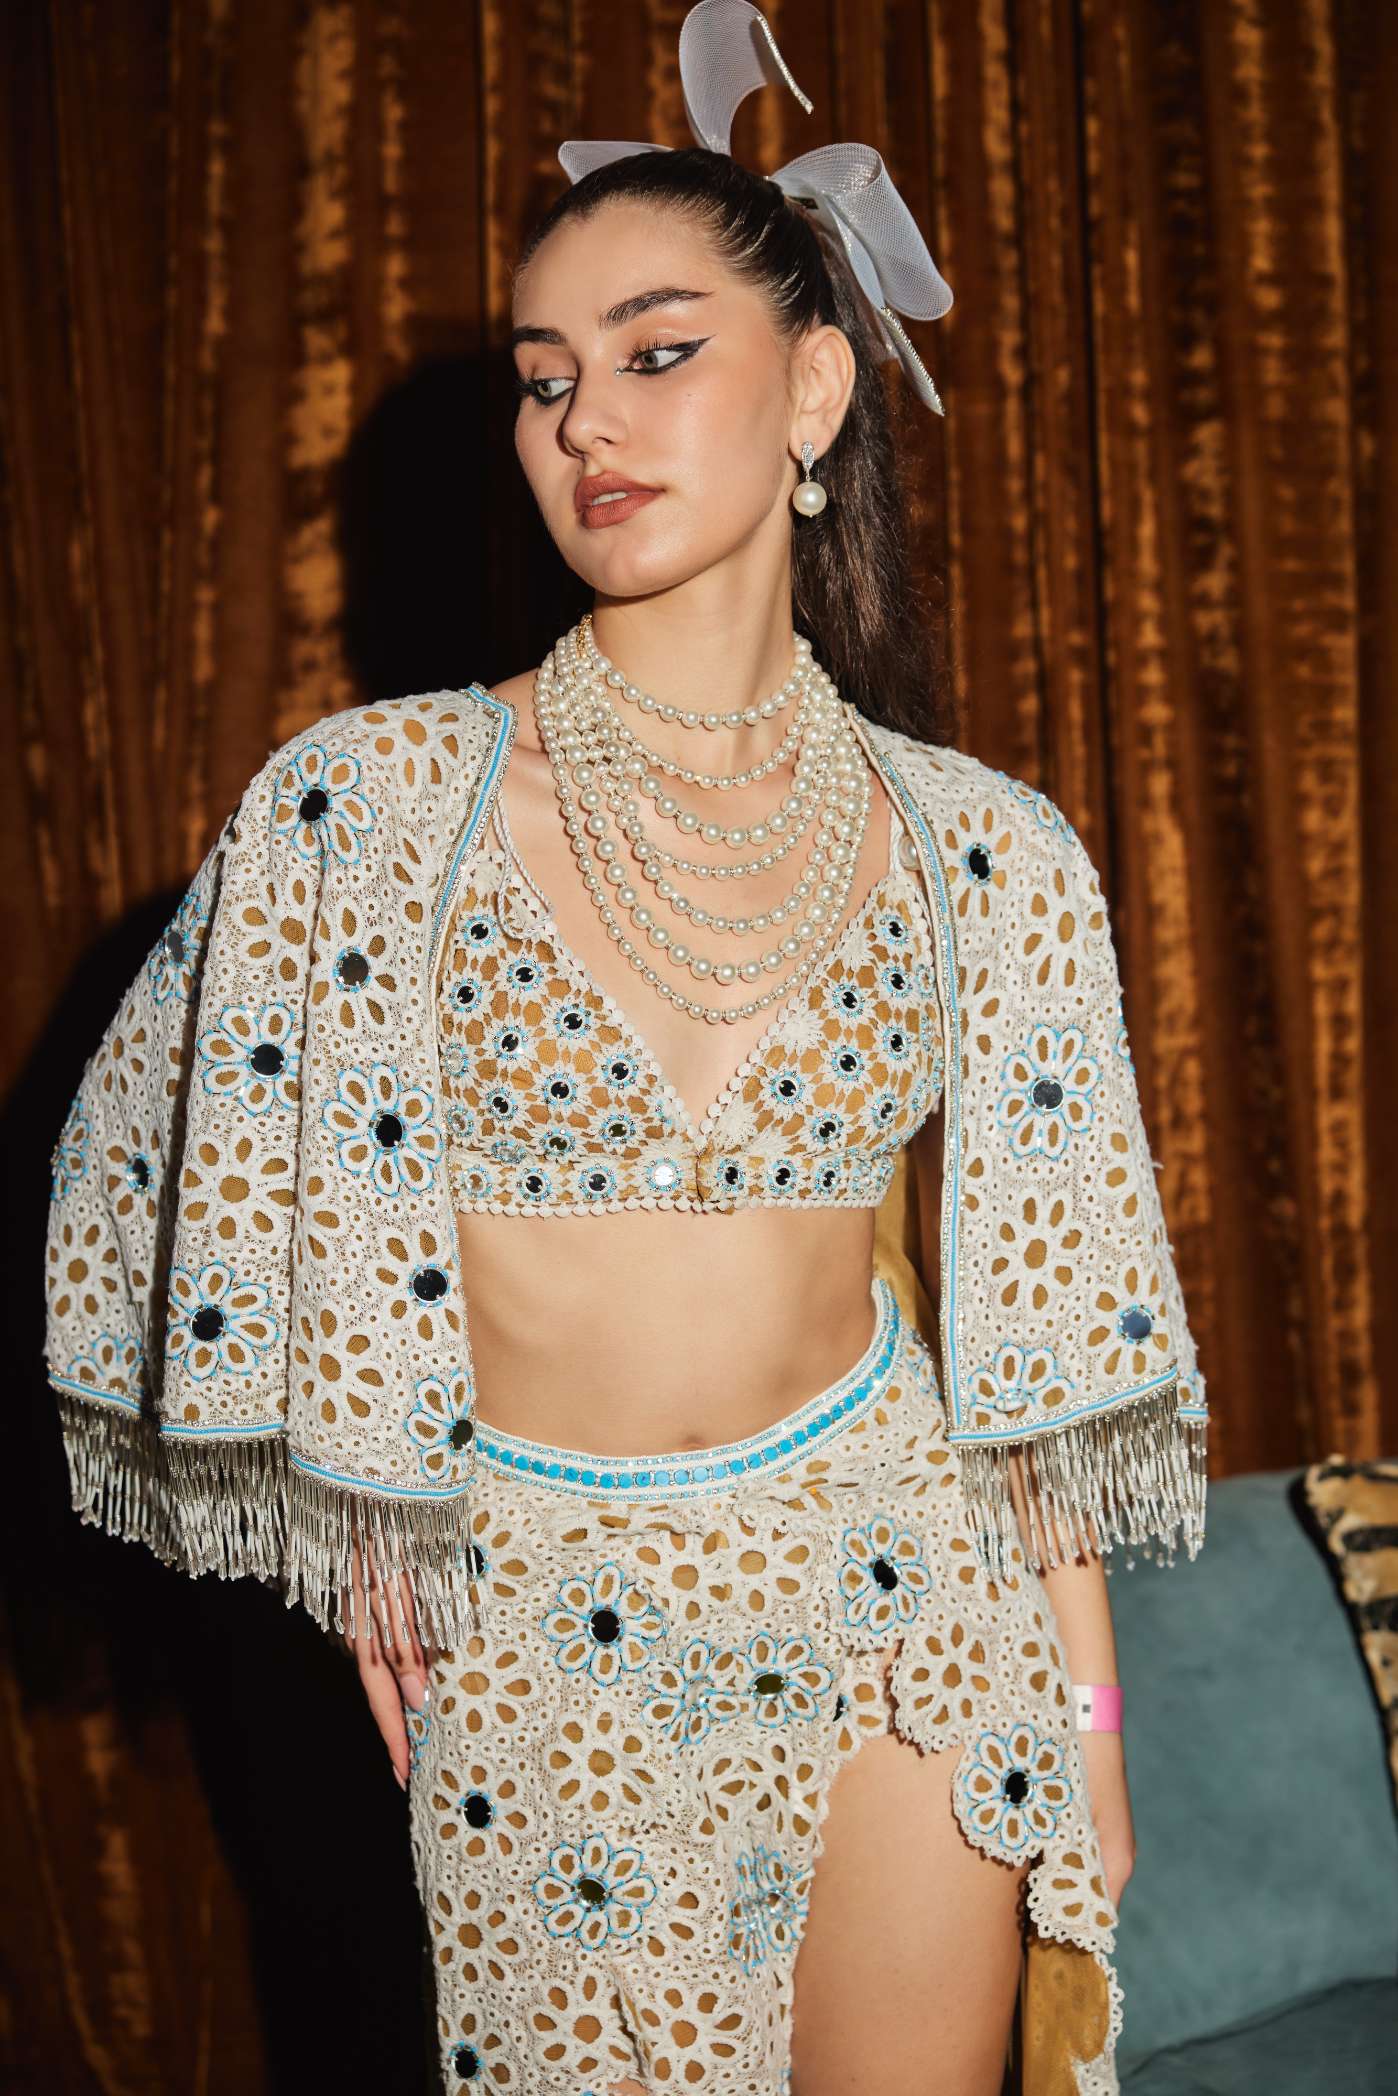 Crochet Tie Up
Crop With Turquoise
Beads, Mirrors And Pearls